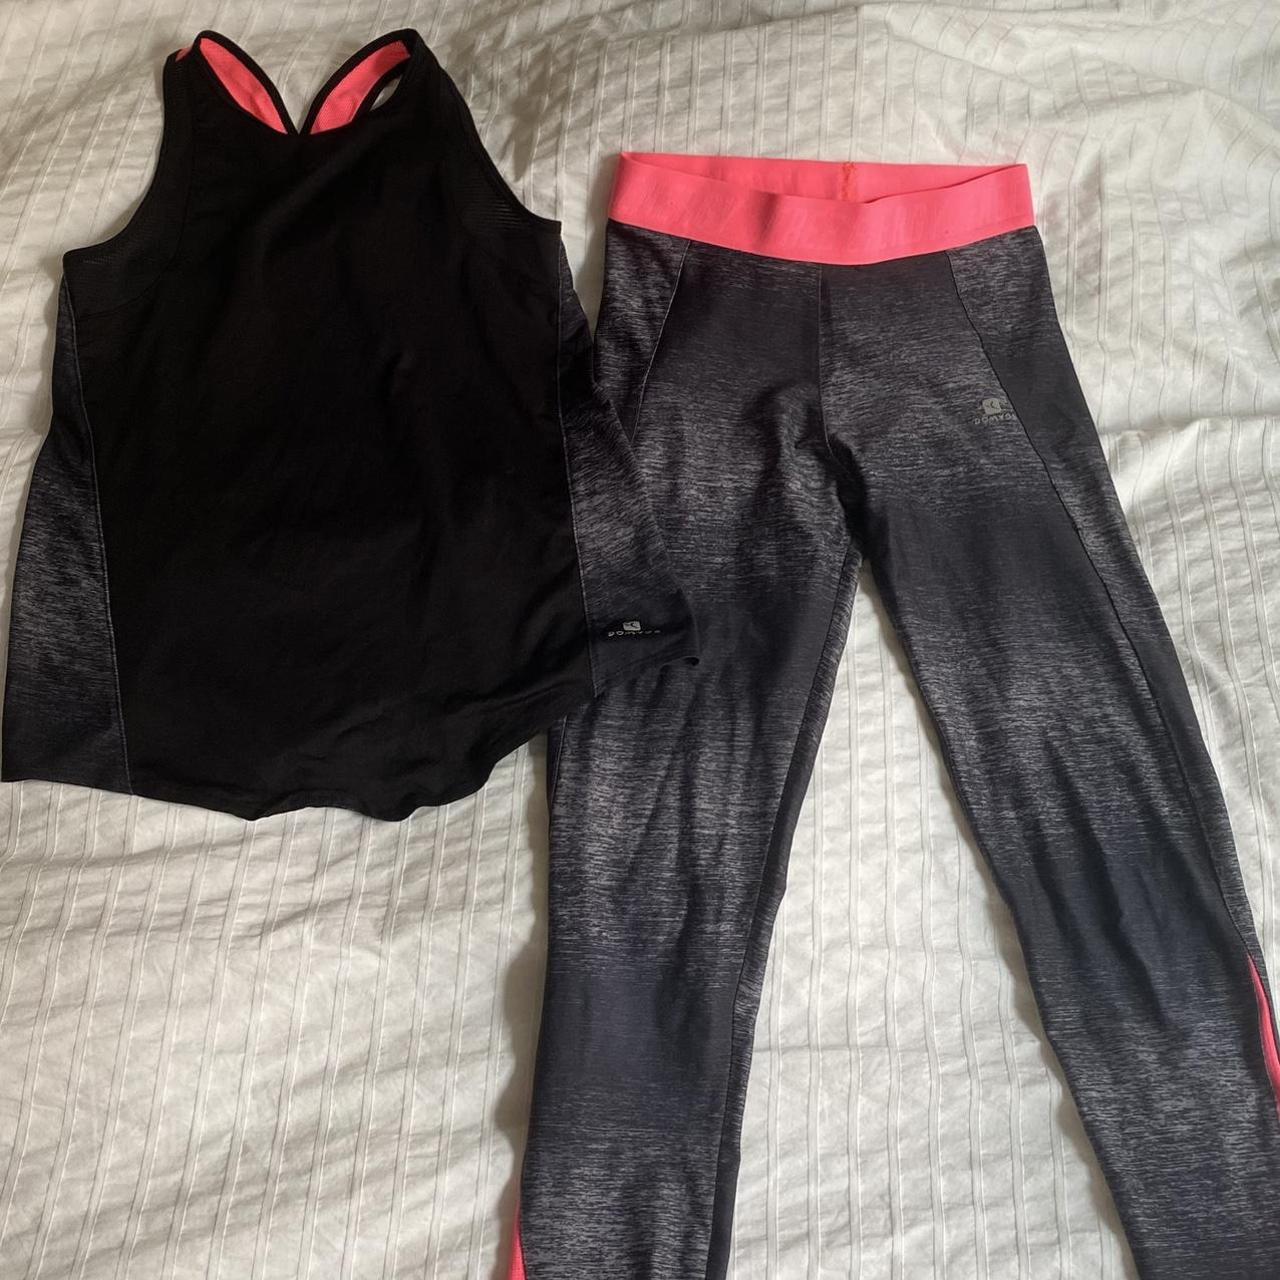 Matching sports bra and legging set from Fit2Run.  - Depop